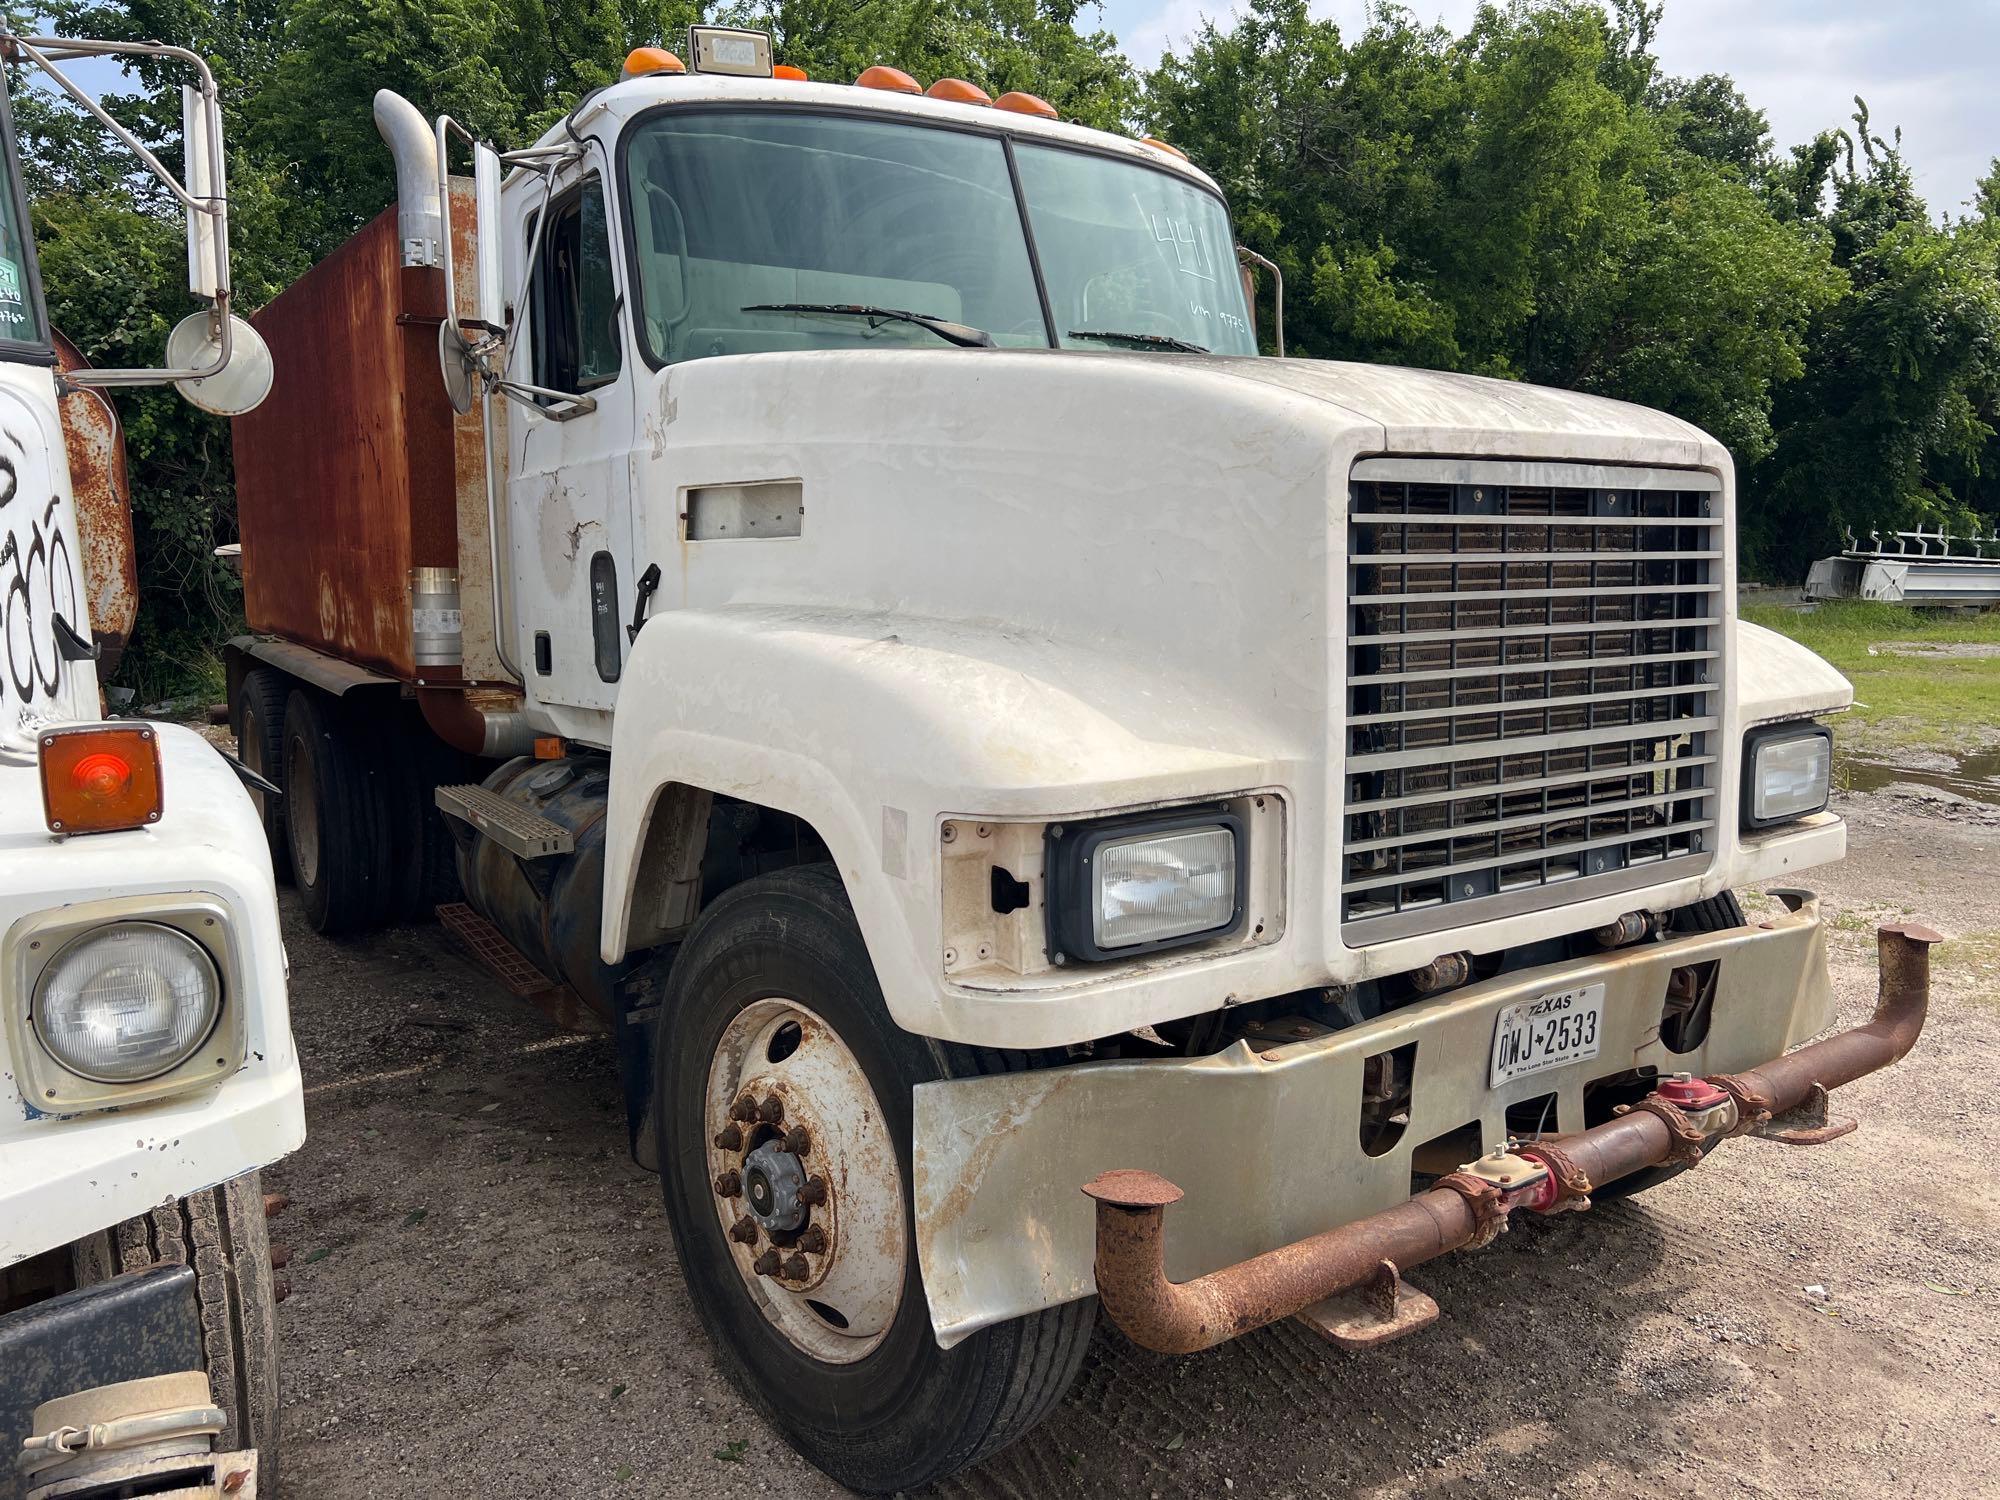 1994 MACK CH613 WATER TRUCK VN:029775 powered by Mack diesel engine, equipped with Eaton Fuller 9